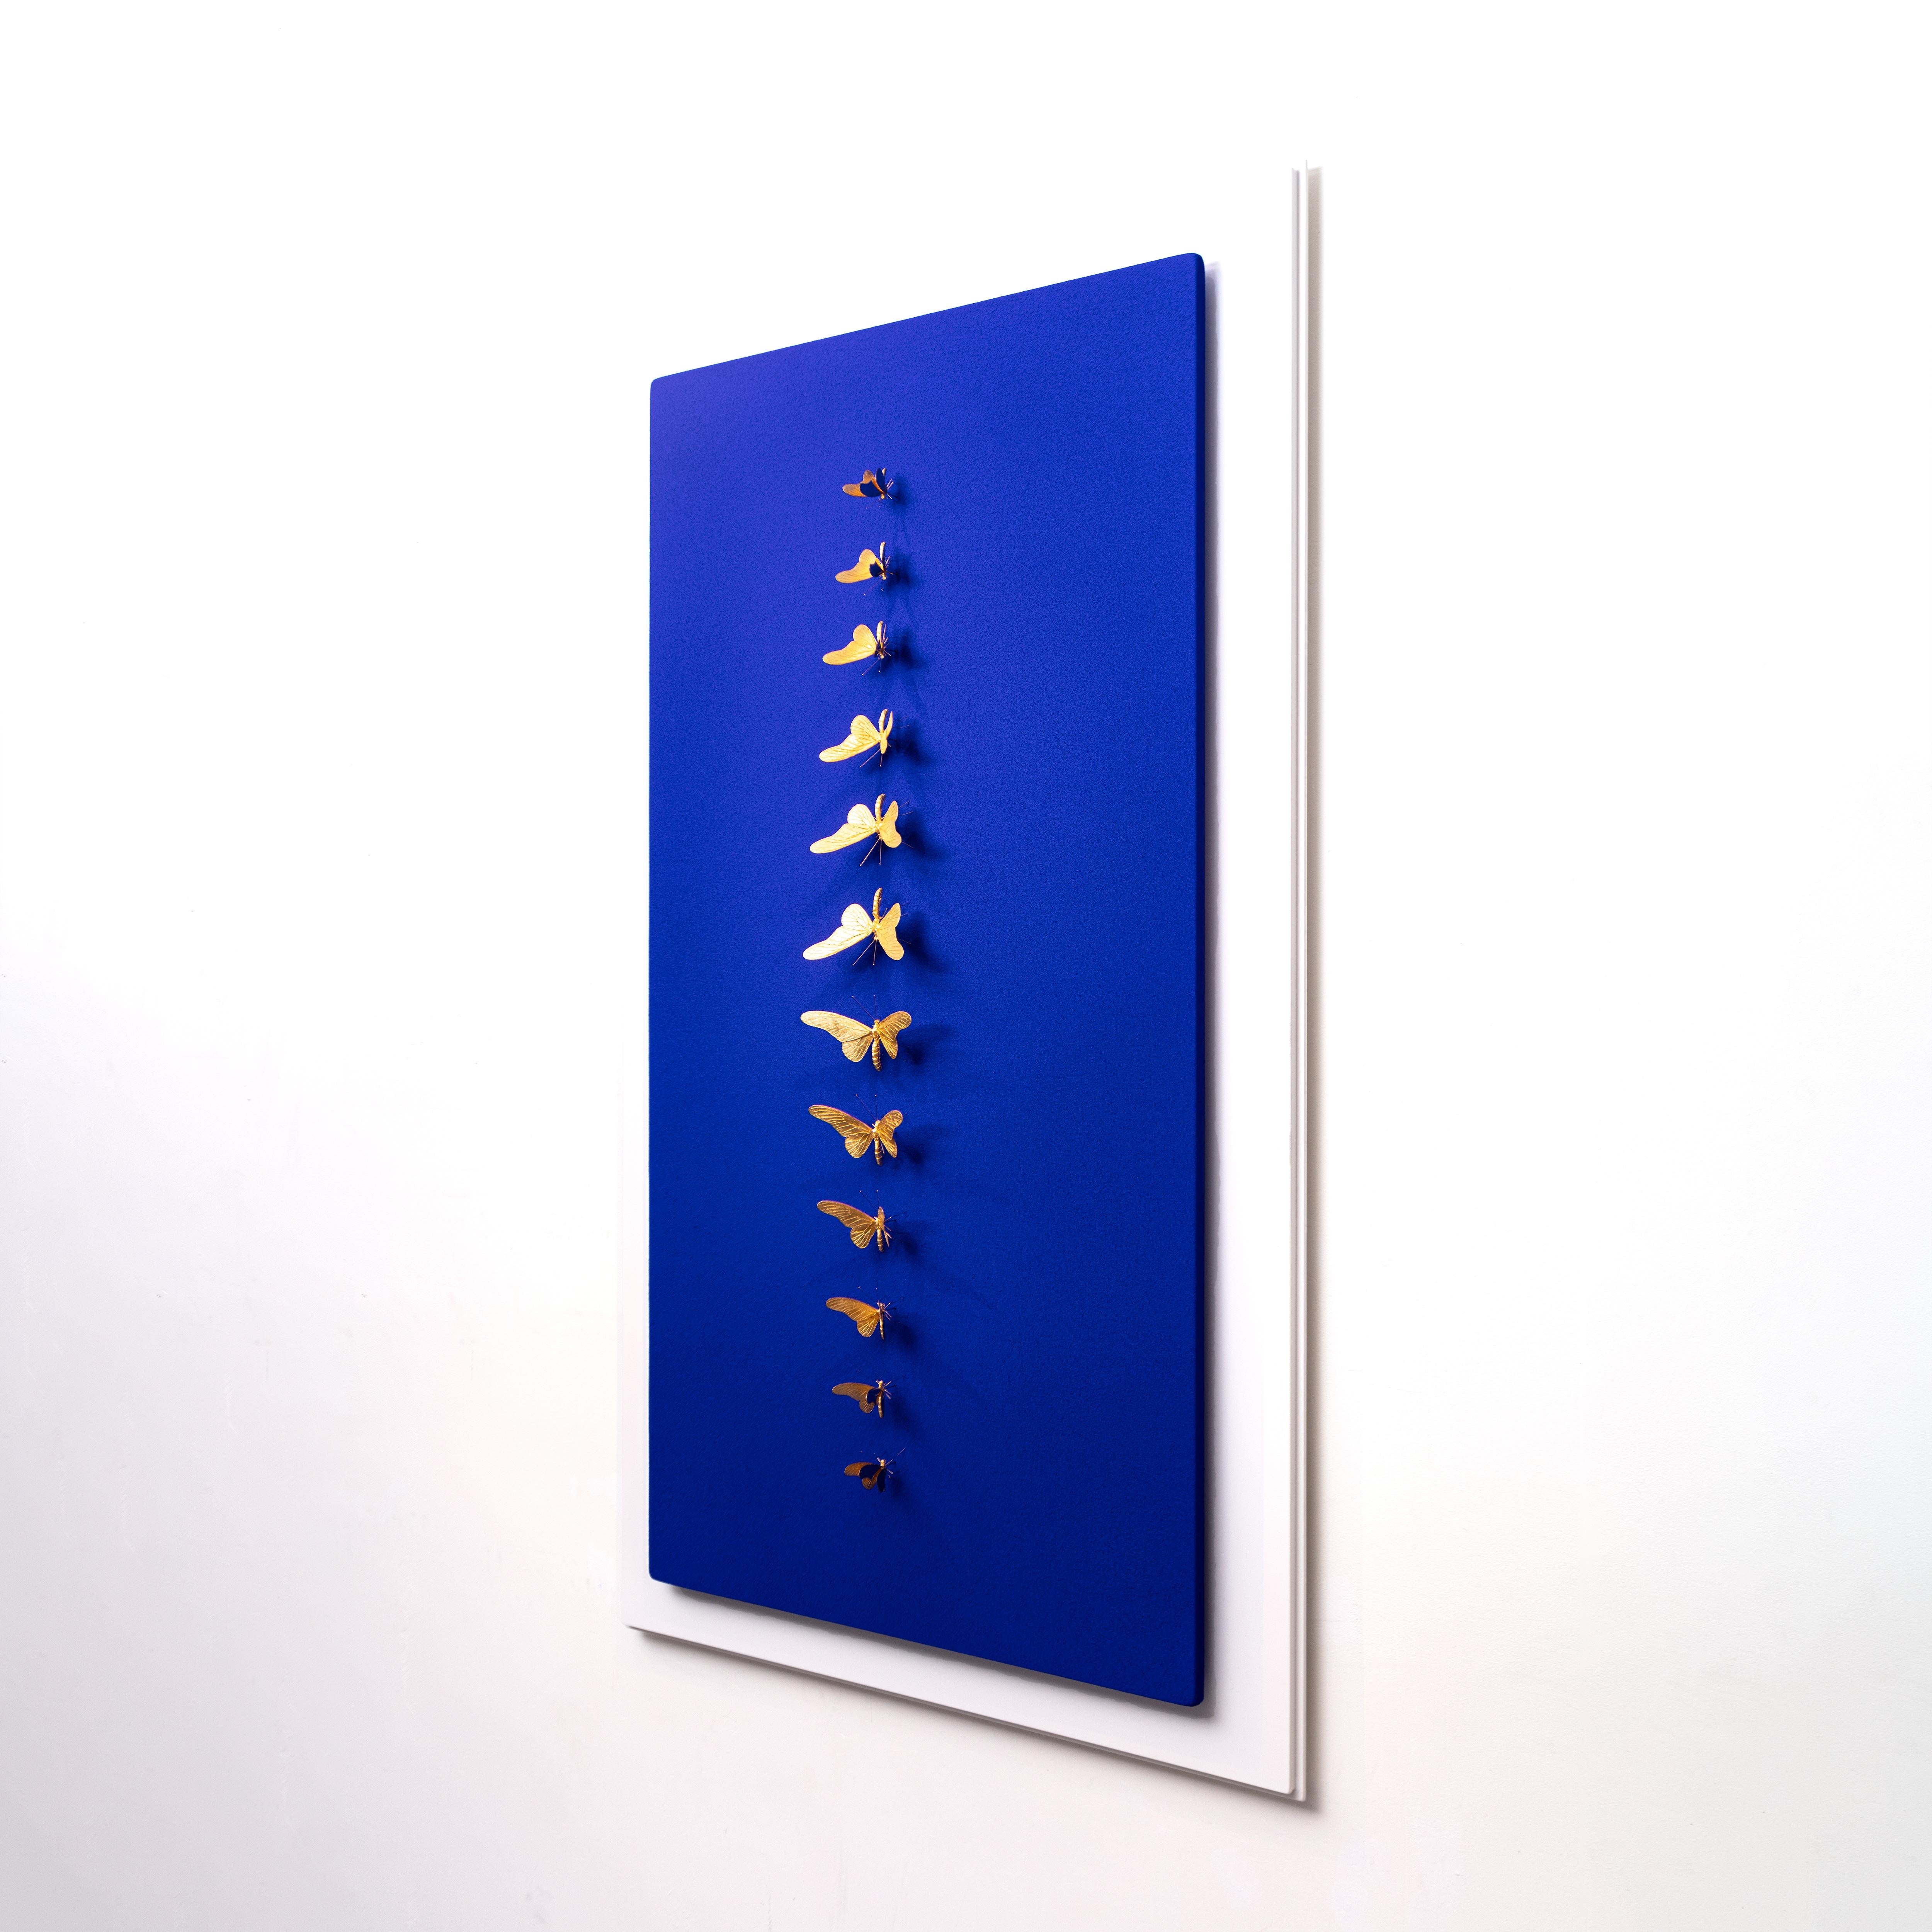 Metamorphosis Redux Blue
Pigments and gold butterflies on canvas and wood.

As a self-taught artist with a medical background in surgery, bio-engineering and design, he stretches the limits of technical as well as aesthetic potential, applying the